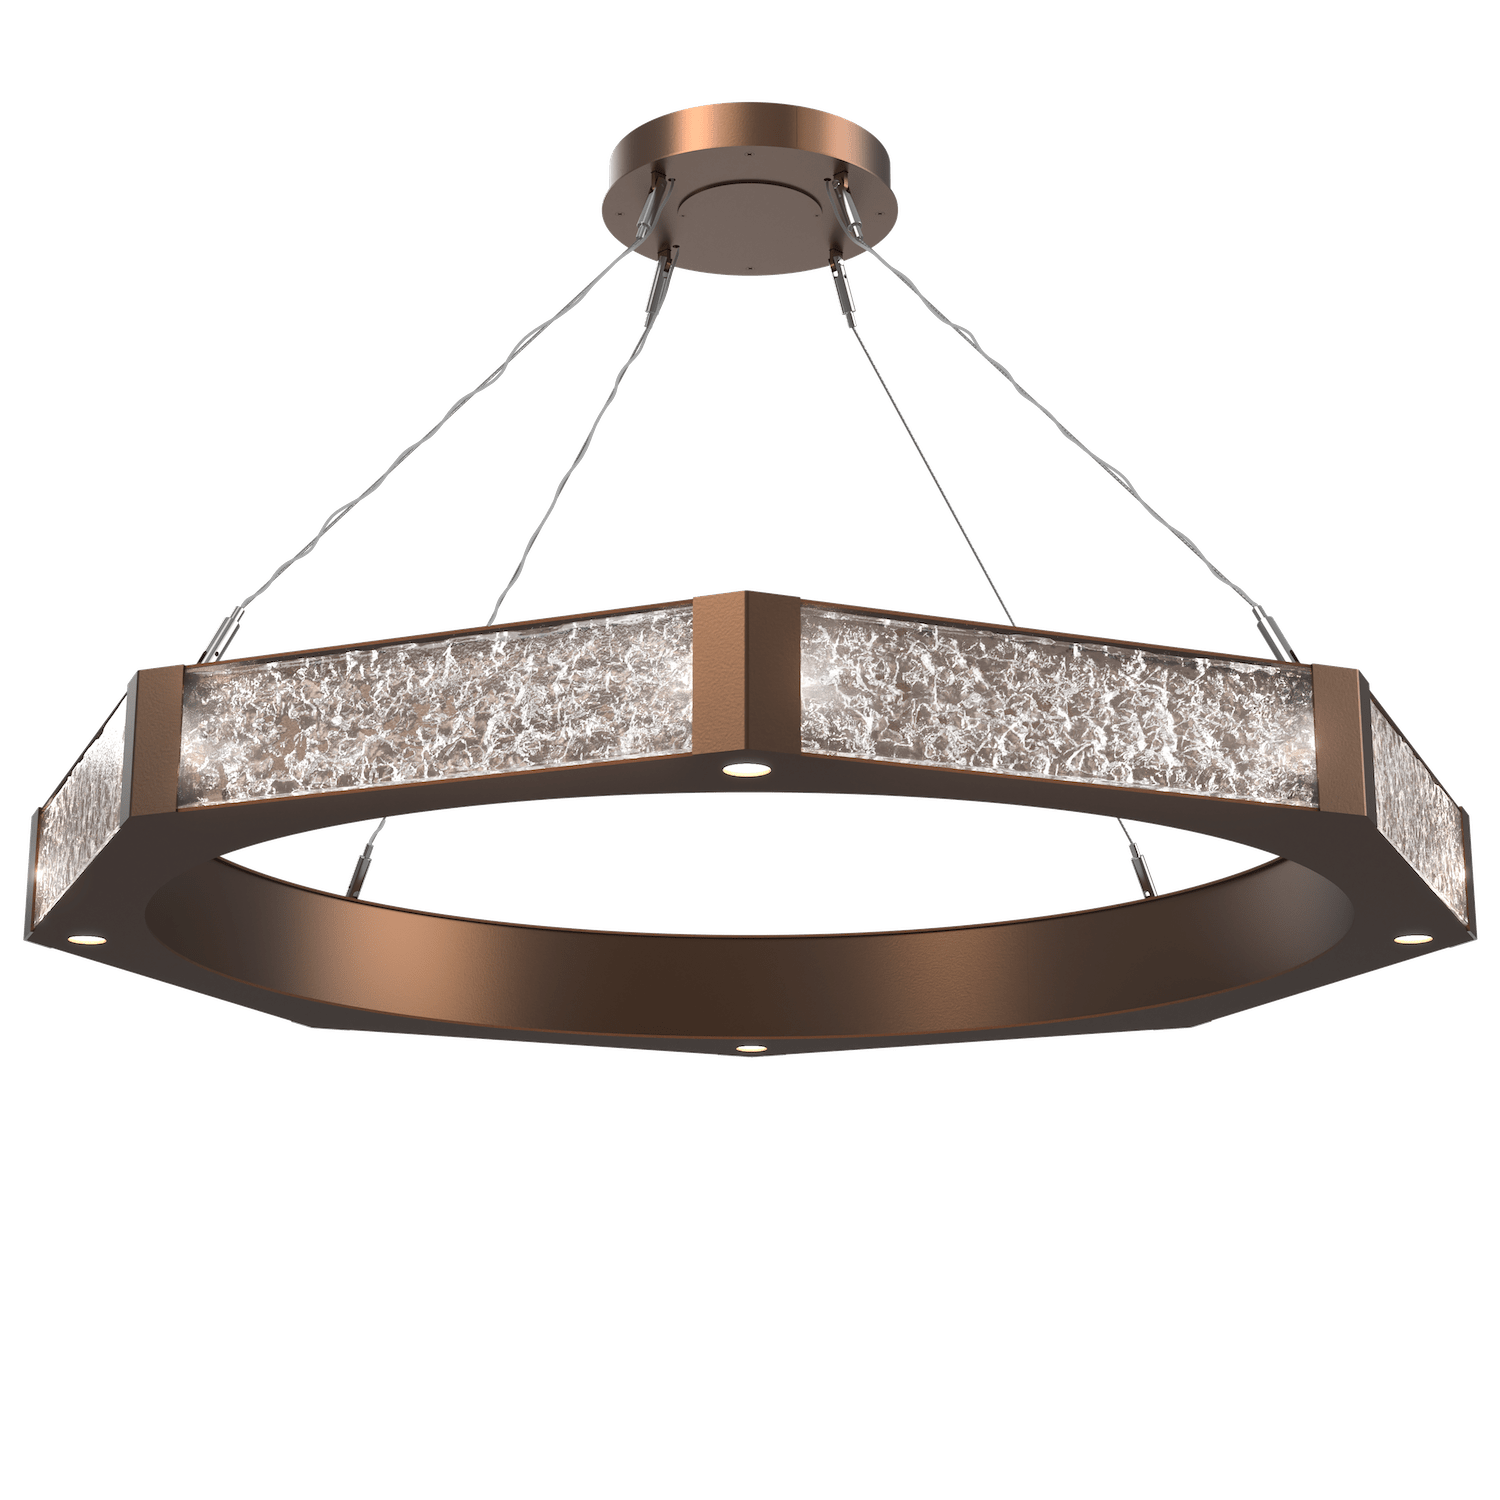 CHB0061-48-BB-GC-Hammerton-Studio-Glacier-48-inch-ring-chandelier-with-burnished-bronze-finish-and-clear-blown-glass-with-geo-clear-cast-glass-diffusers-and-LED-lamping